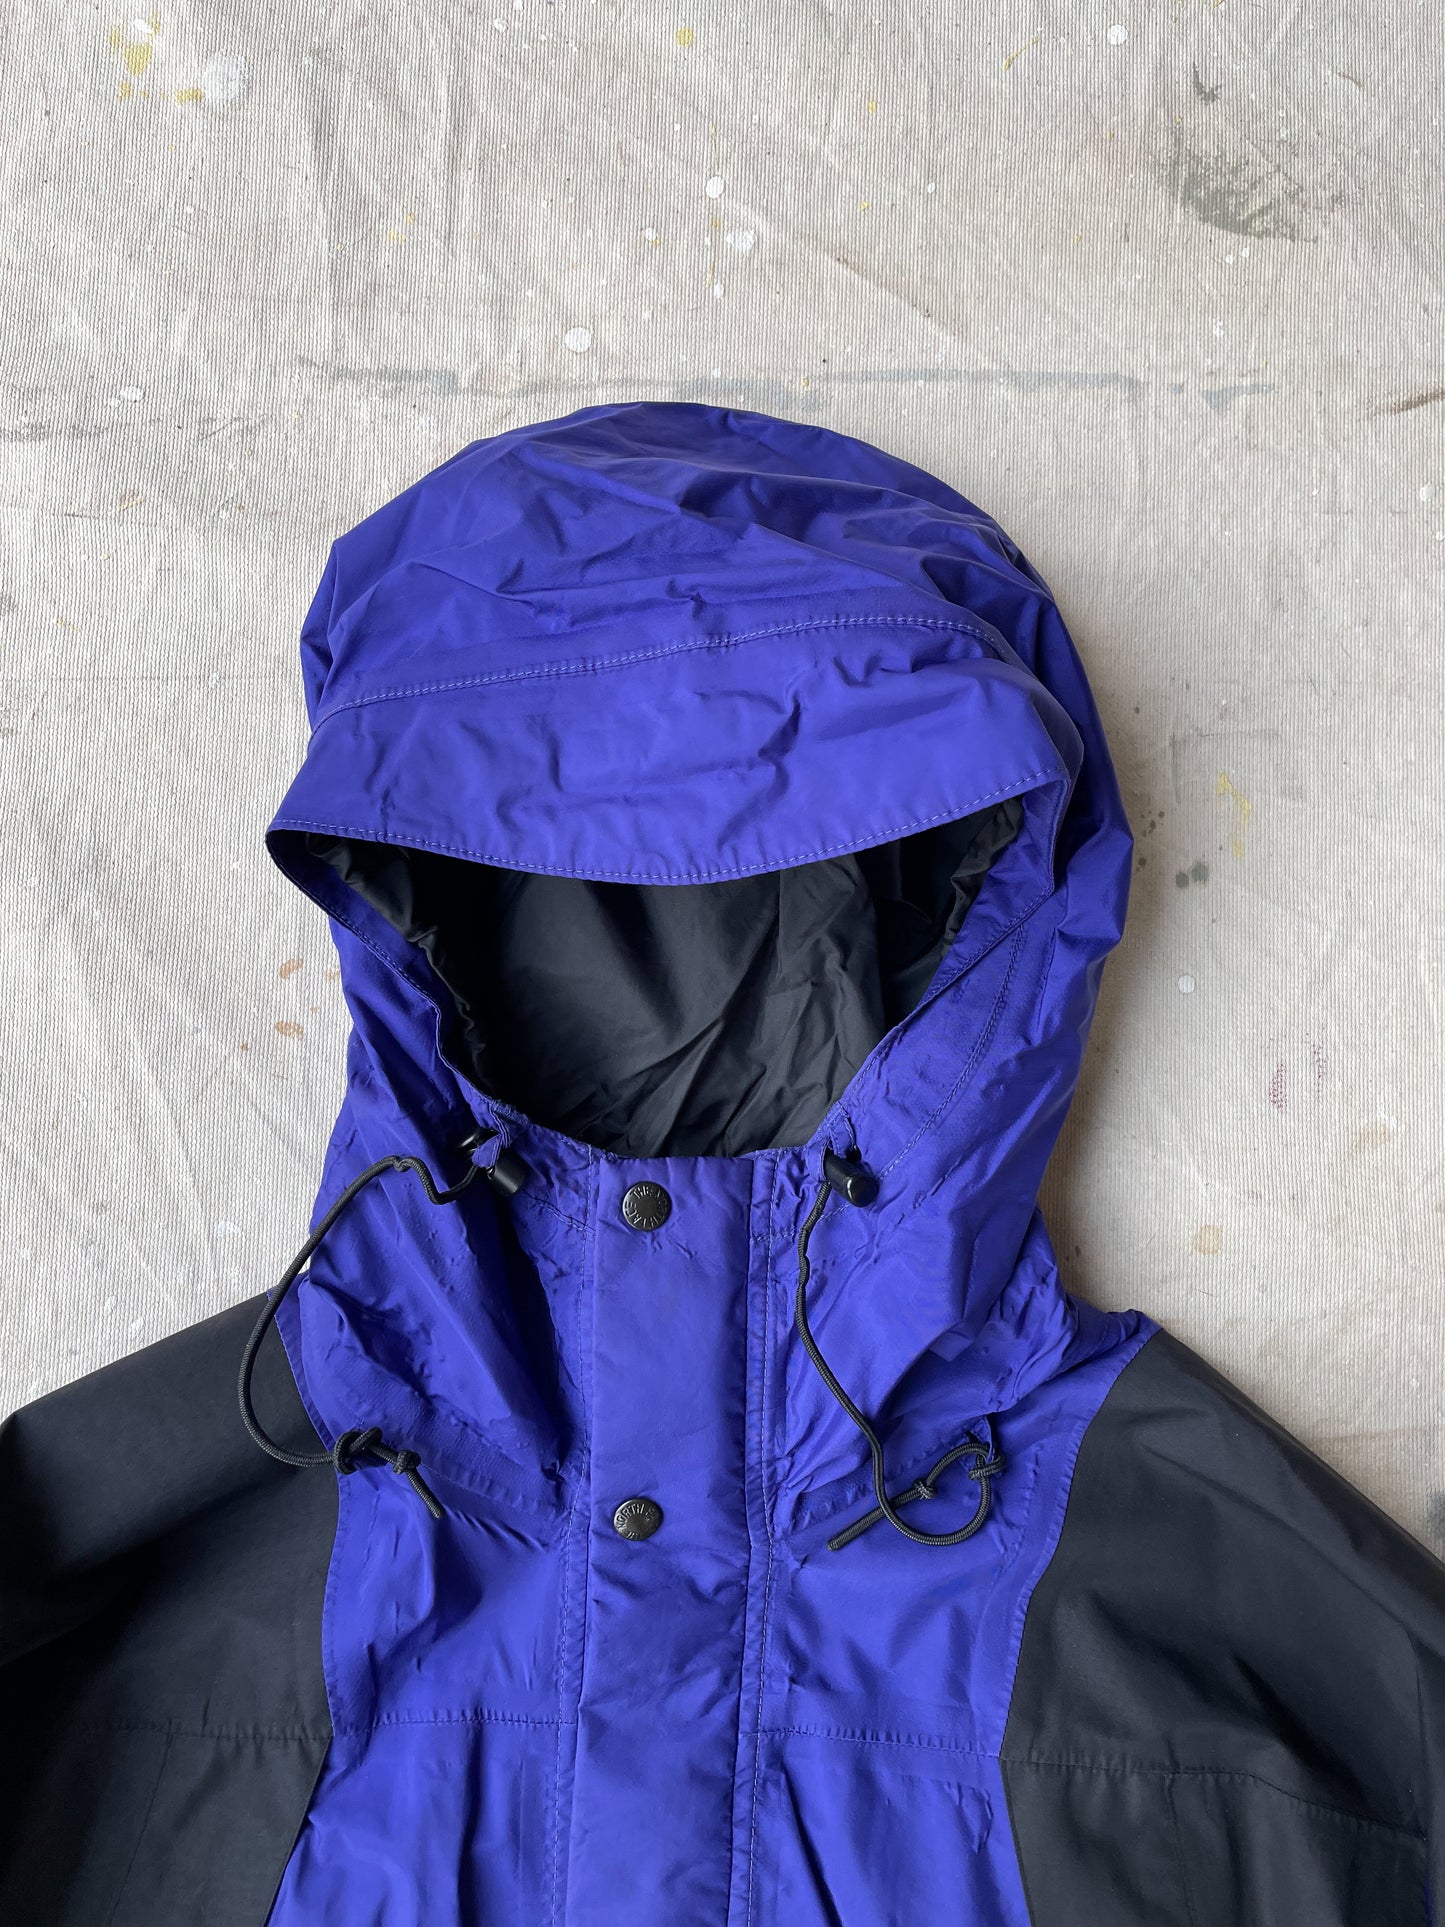 THE NORTH FACE JACKET—PURPLE [M]